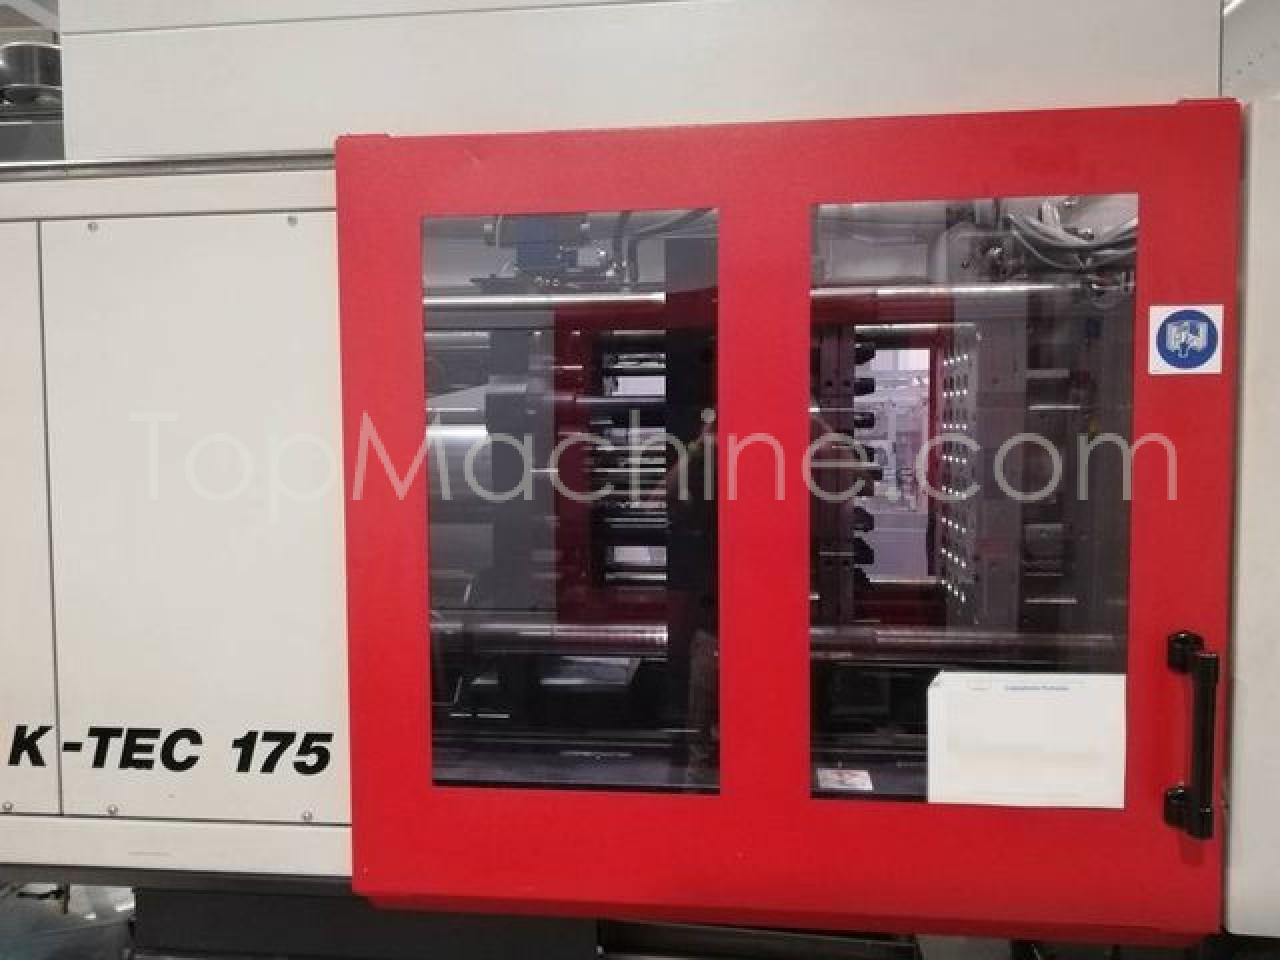 Used Ferromatik K-TEC 175-1650 S Injection Moulding Clamping force up to 1000 T